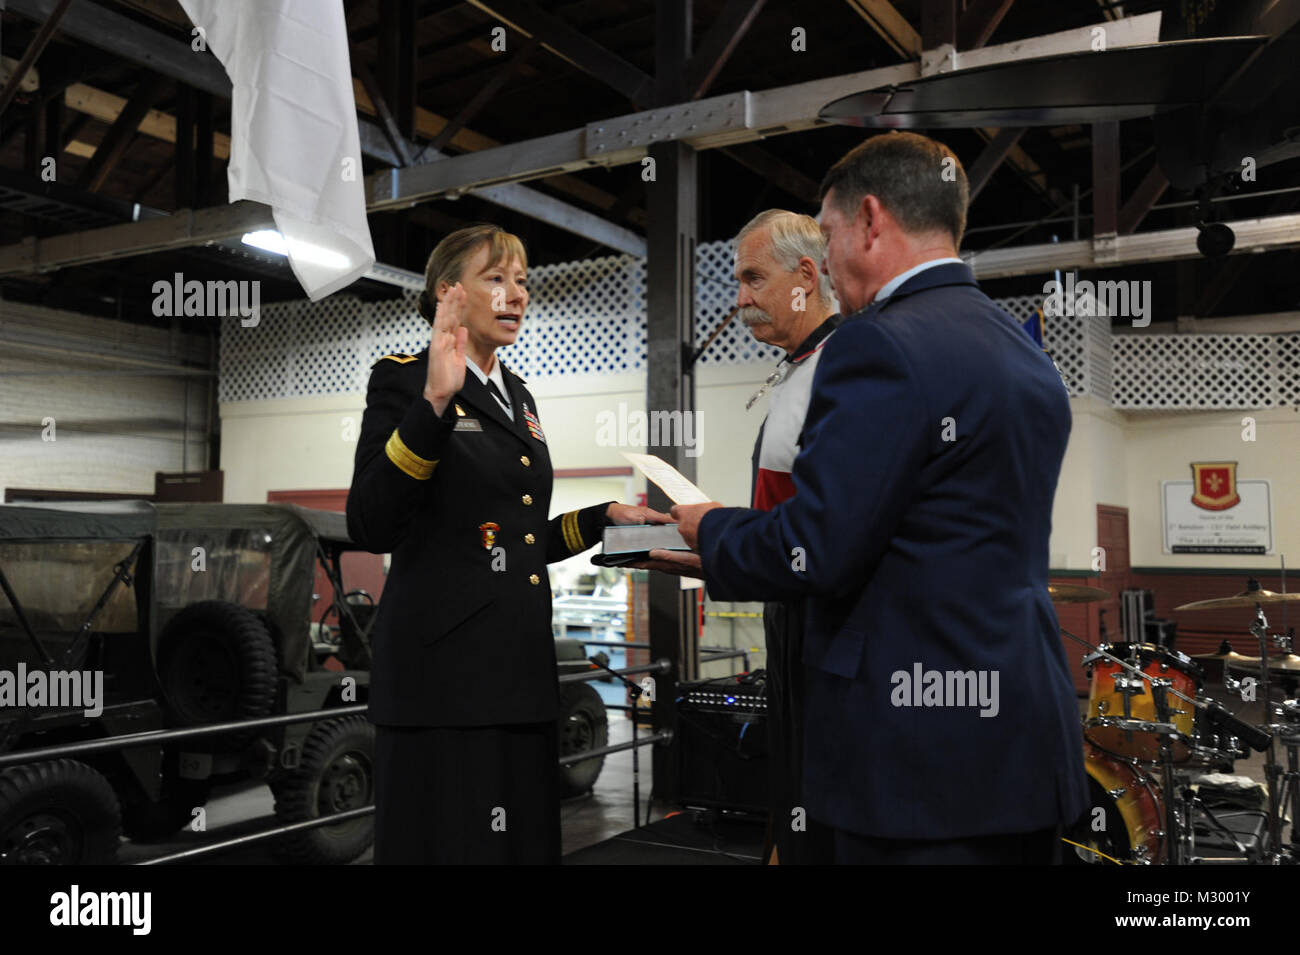 Maj. Gen. John F. Nichols swears in Maj. Gen. Joyce L. Stevens, Assistant Adjutant General-Army for the state of Texas, during her promotion ceremony at Camp Mabry in Austin, Texas on Sep. 5, 2012, as her husband, Col. (Ret.) Stryker looks on. Maj. Gen. Joyce L. Stevens Promotion- Swearing In by Texas Military Department Stock Photo